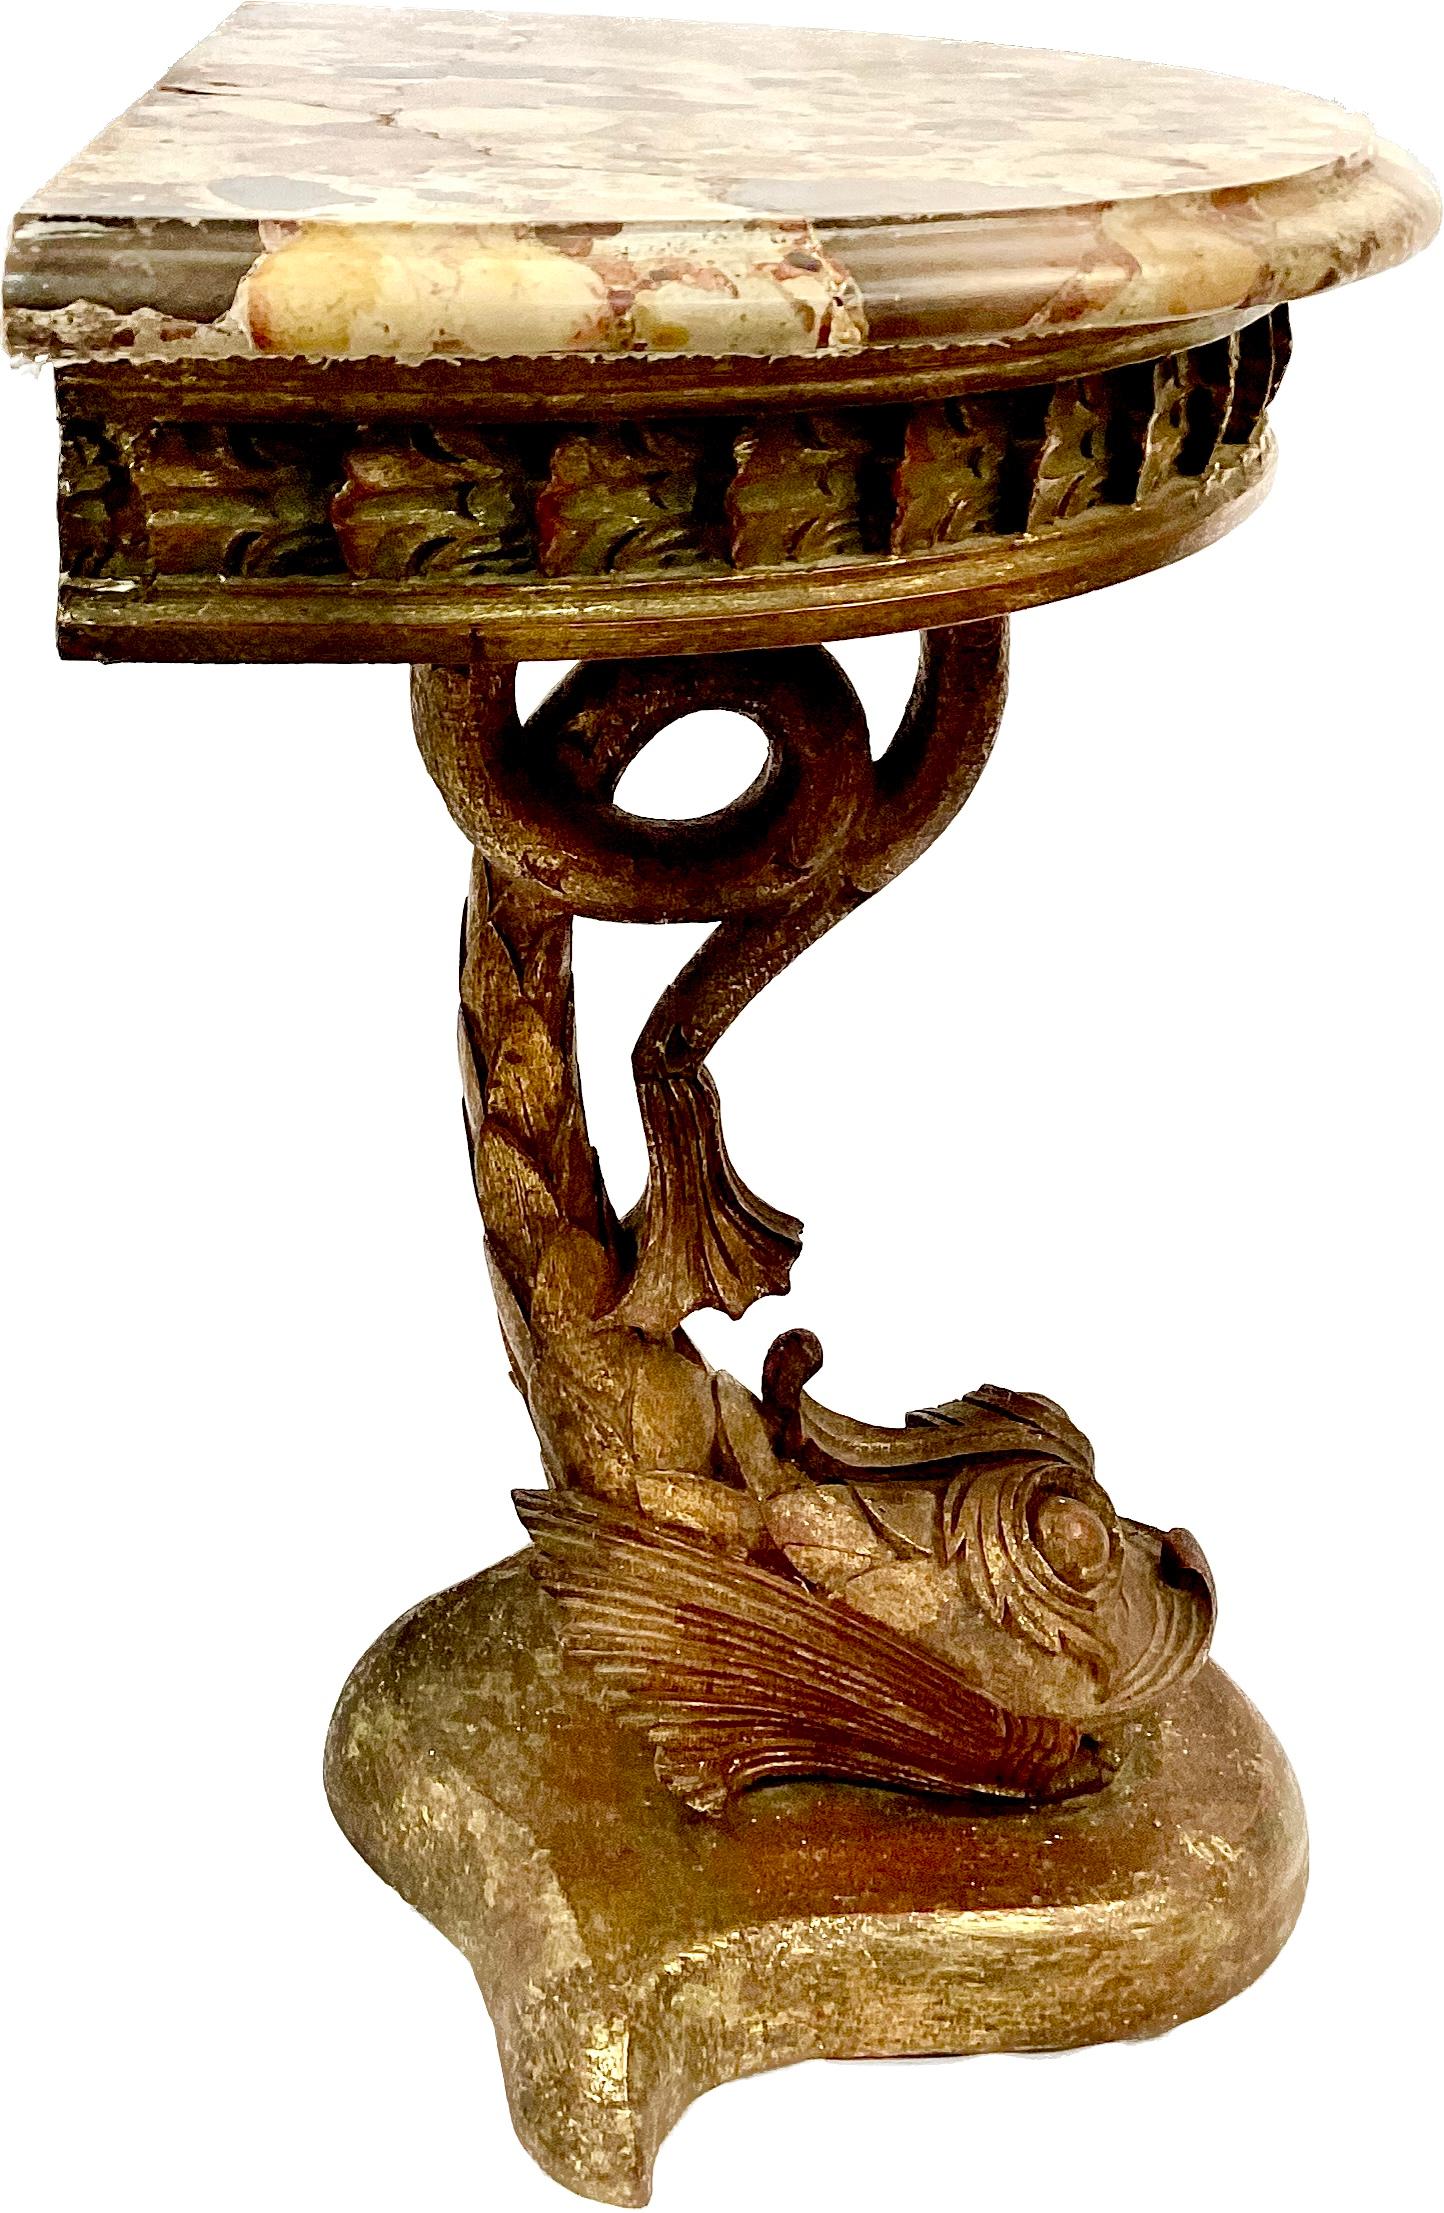 Rococo Diminutive 19th Century Carved Dolphin Form Console Table with Marble Top For Sale